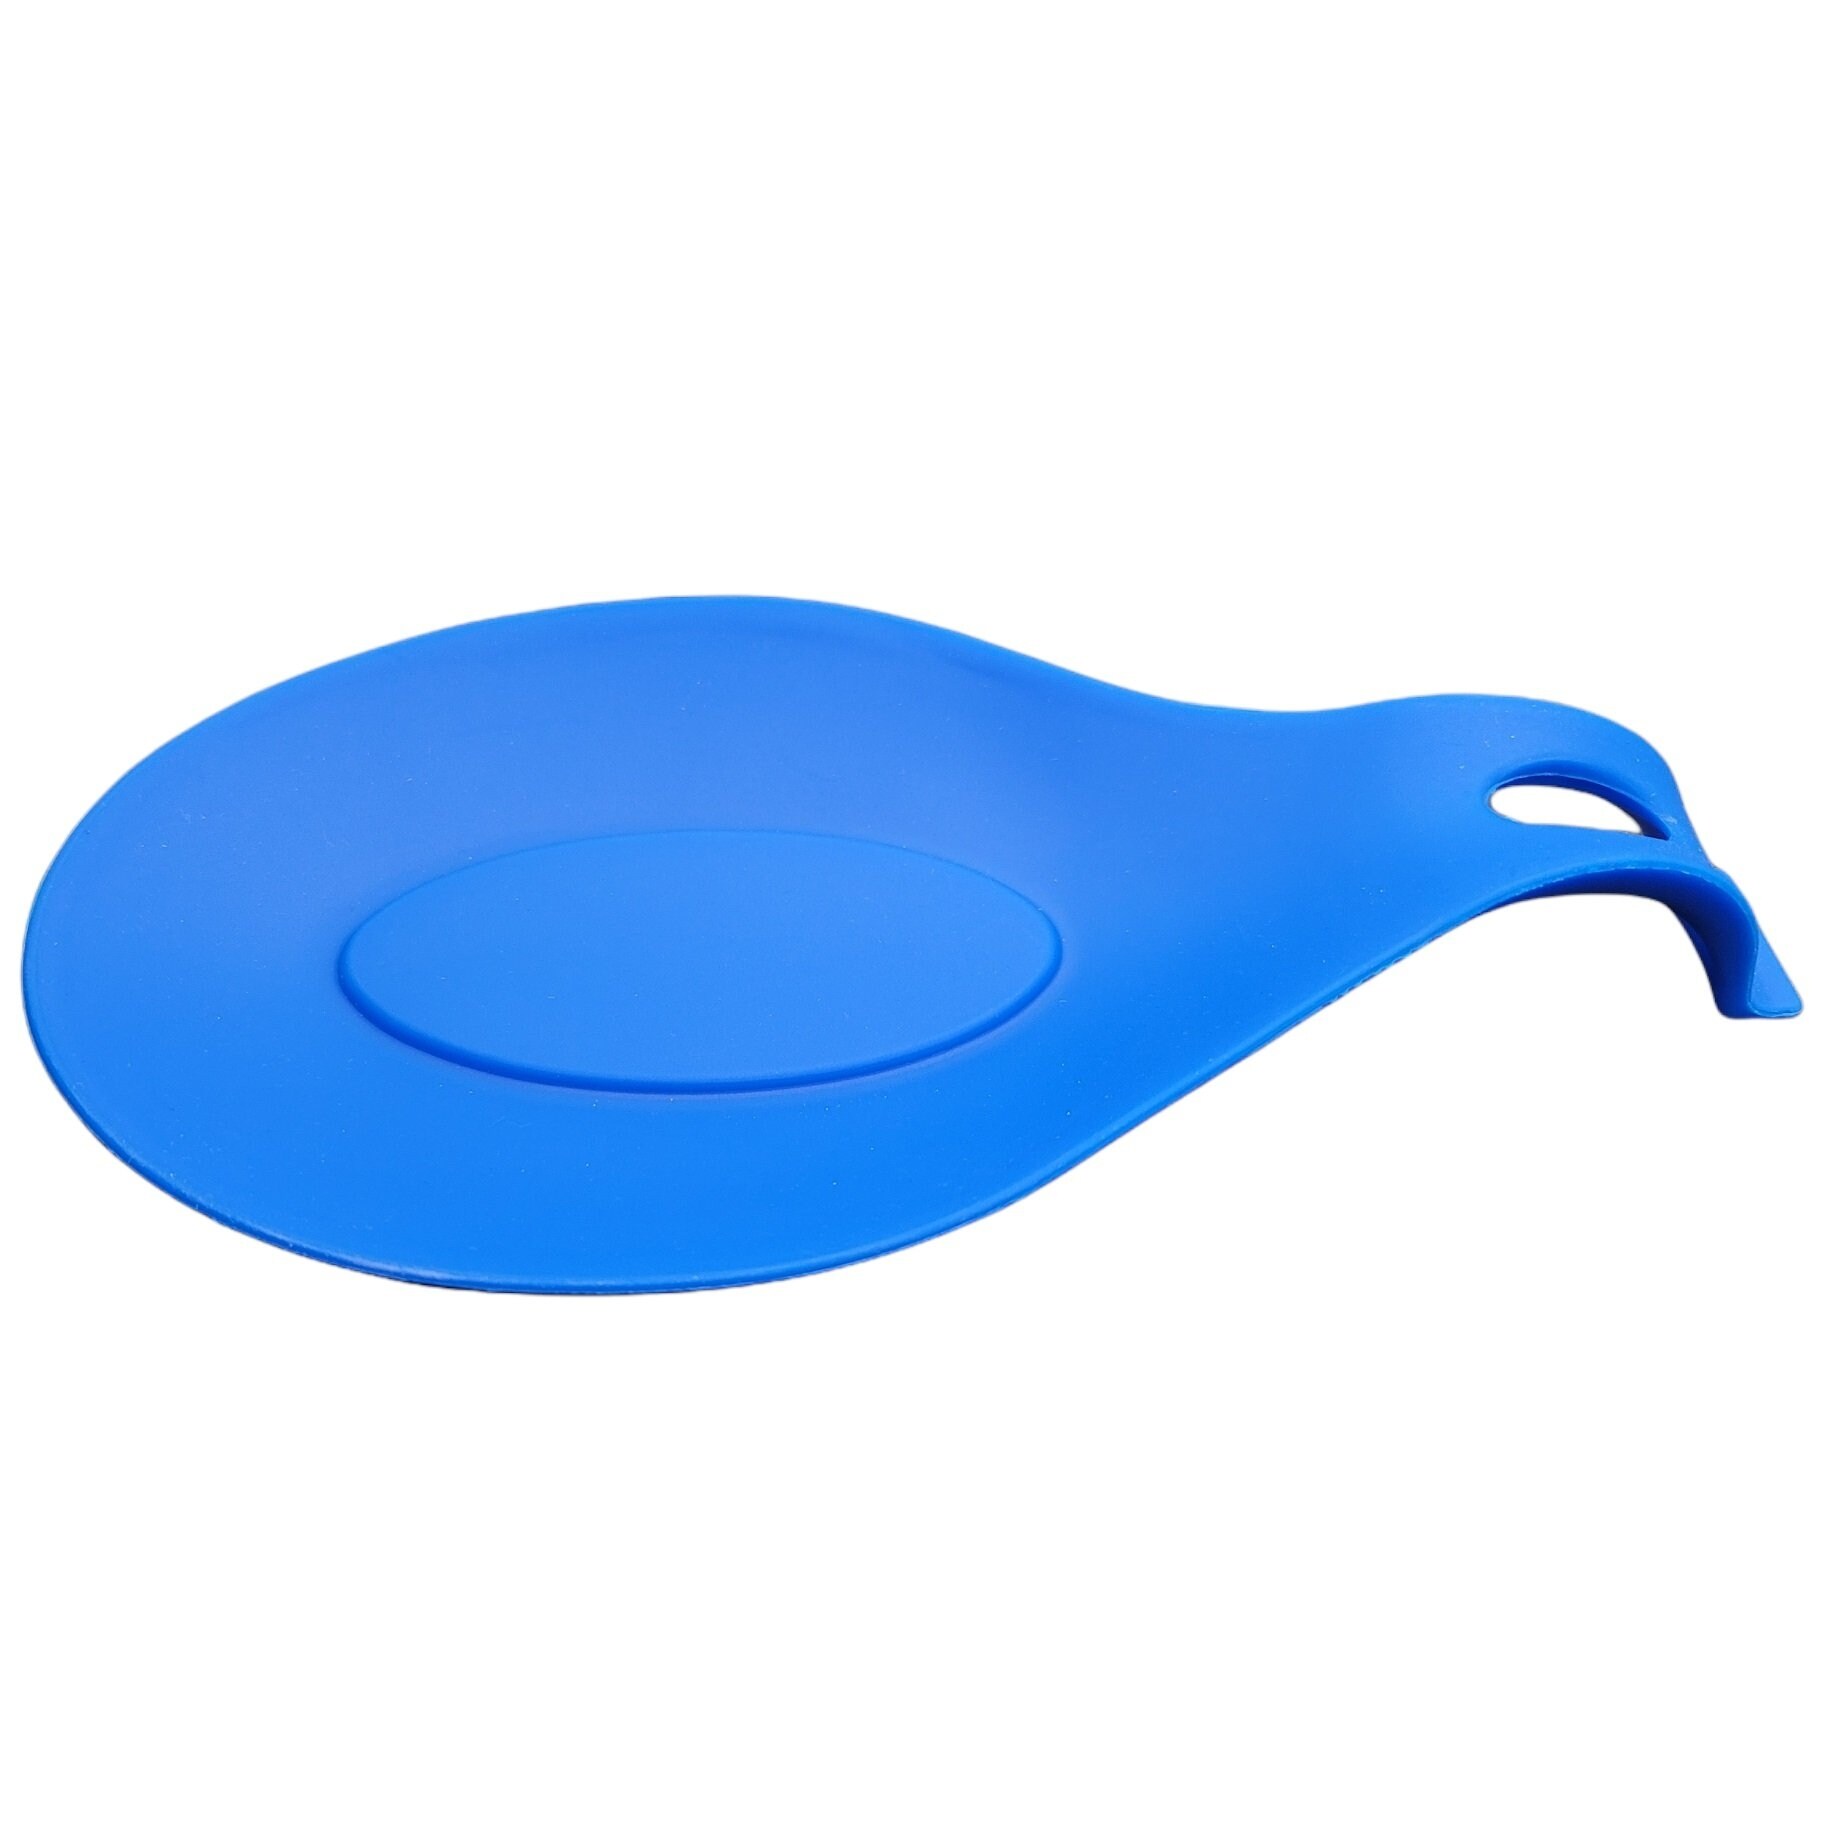 https://ak1.ostkcdn.com/images/products/is/images/direct/e04aa5919e63c391b520b5622d5ec0fff31a9950/Handy-Housewares-Jumbo-Flexible-Silicone-Spoon-Rest%2C-Heat-Resistant-Stove-Top-Kitchen-Utensil-Drip-Pad.jpg